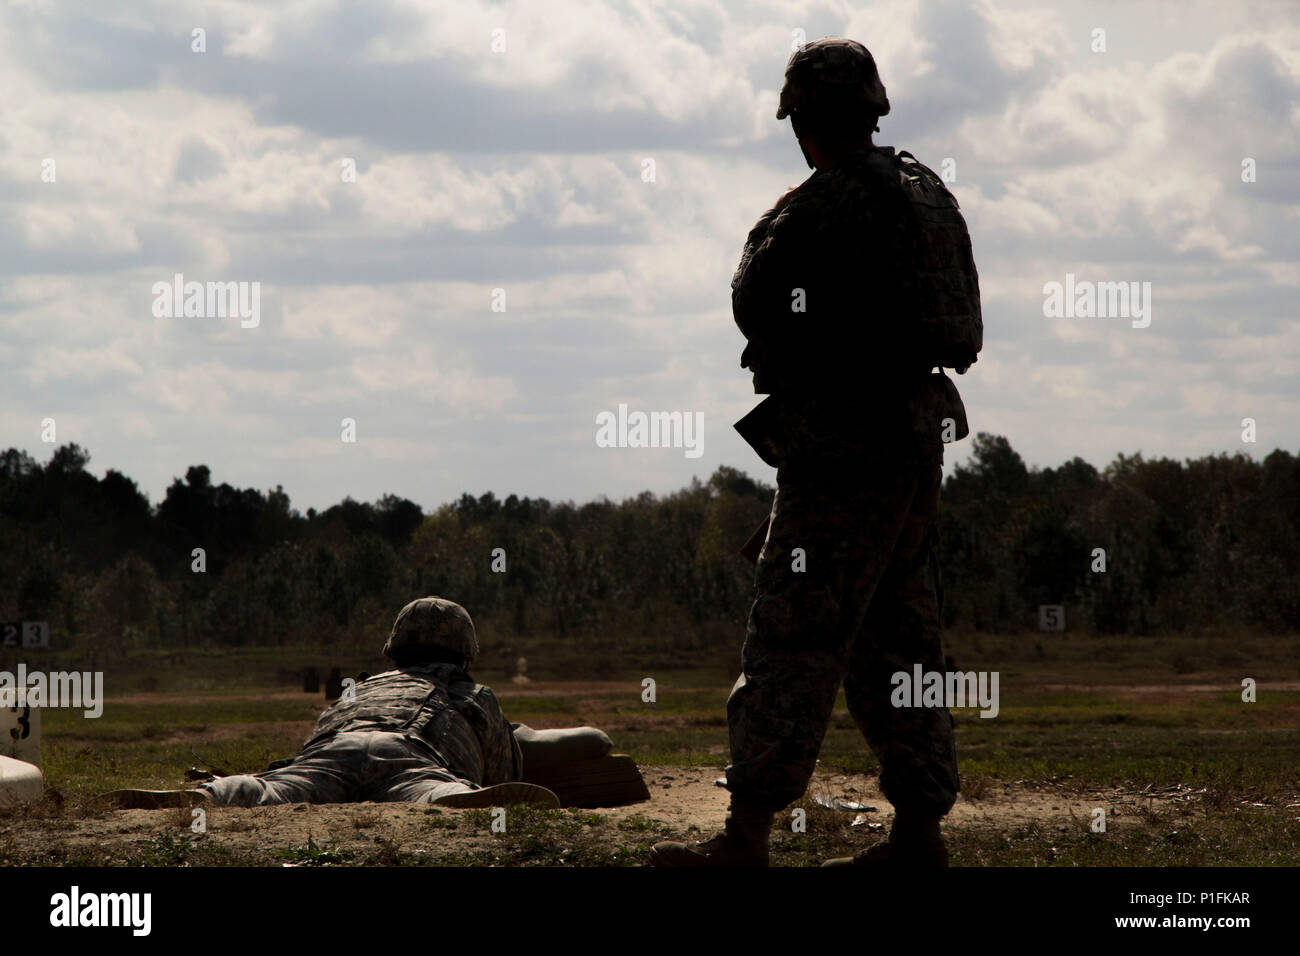 A Soldier assigned to 3rd Military Information Support Battalion, 4th Military Information Support Group, acts as a range safety while other Soldiers engage pop-up targets during an M4 carbine qualification range, Oct. 27, 2016, at Fort Bragg, North Carolina. Stock Photo